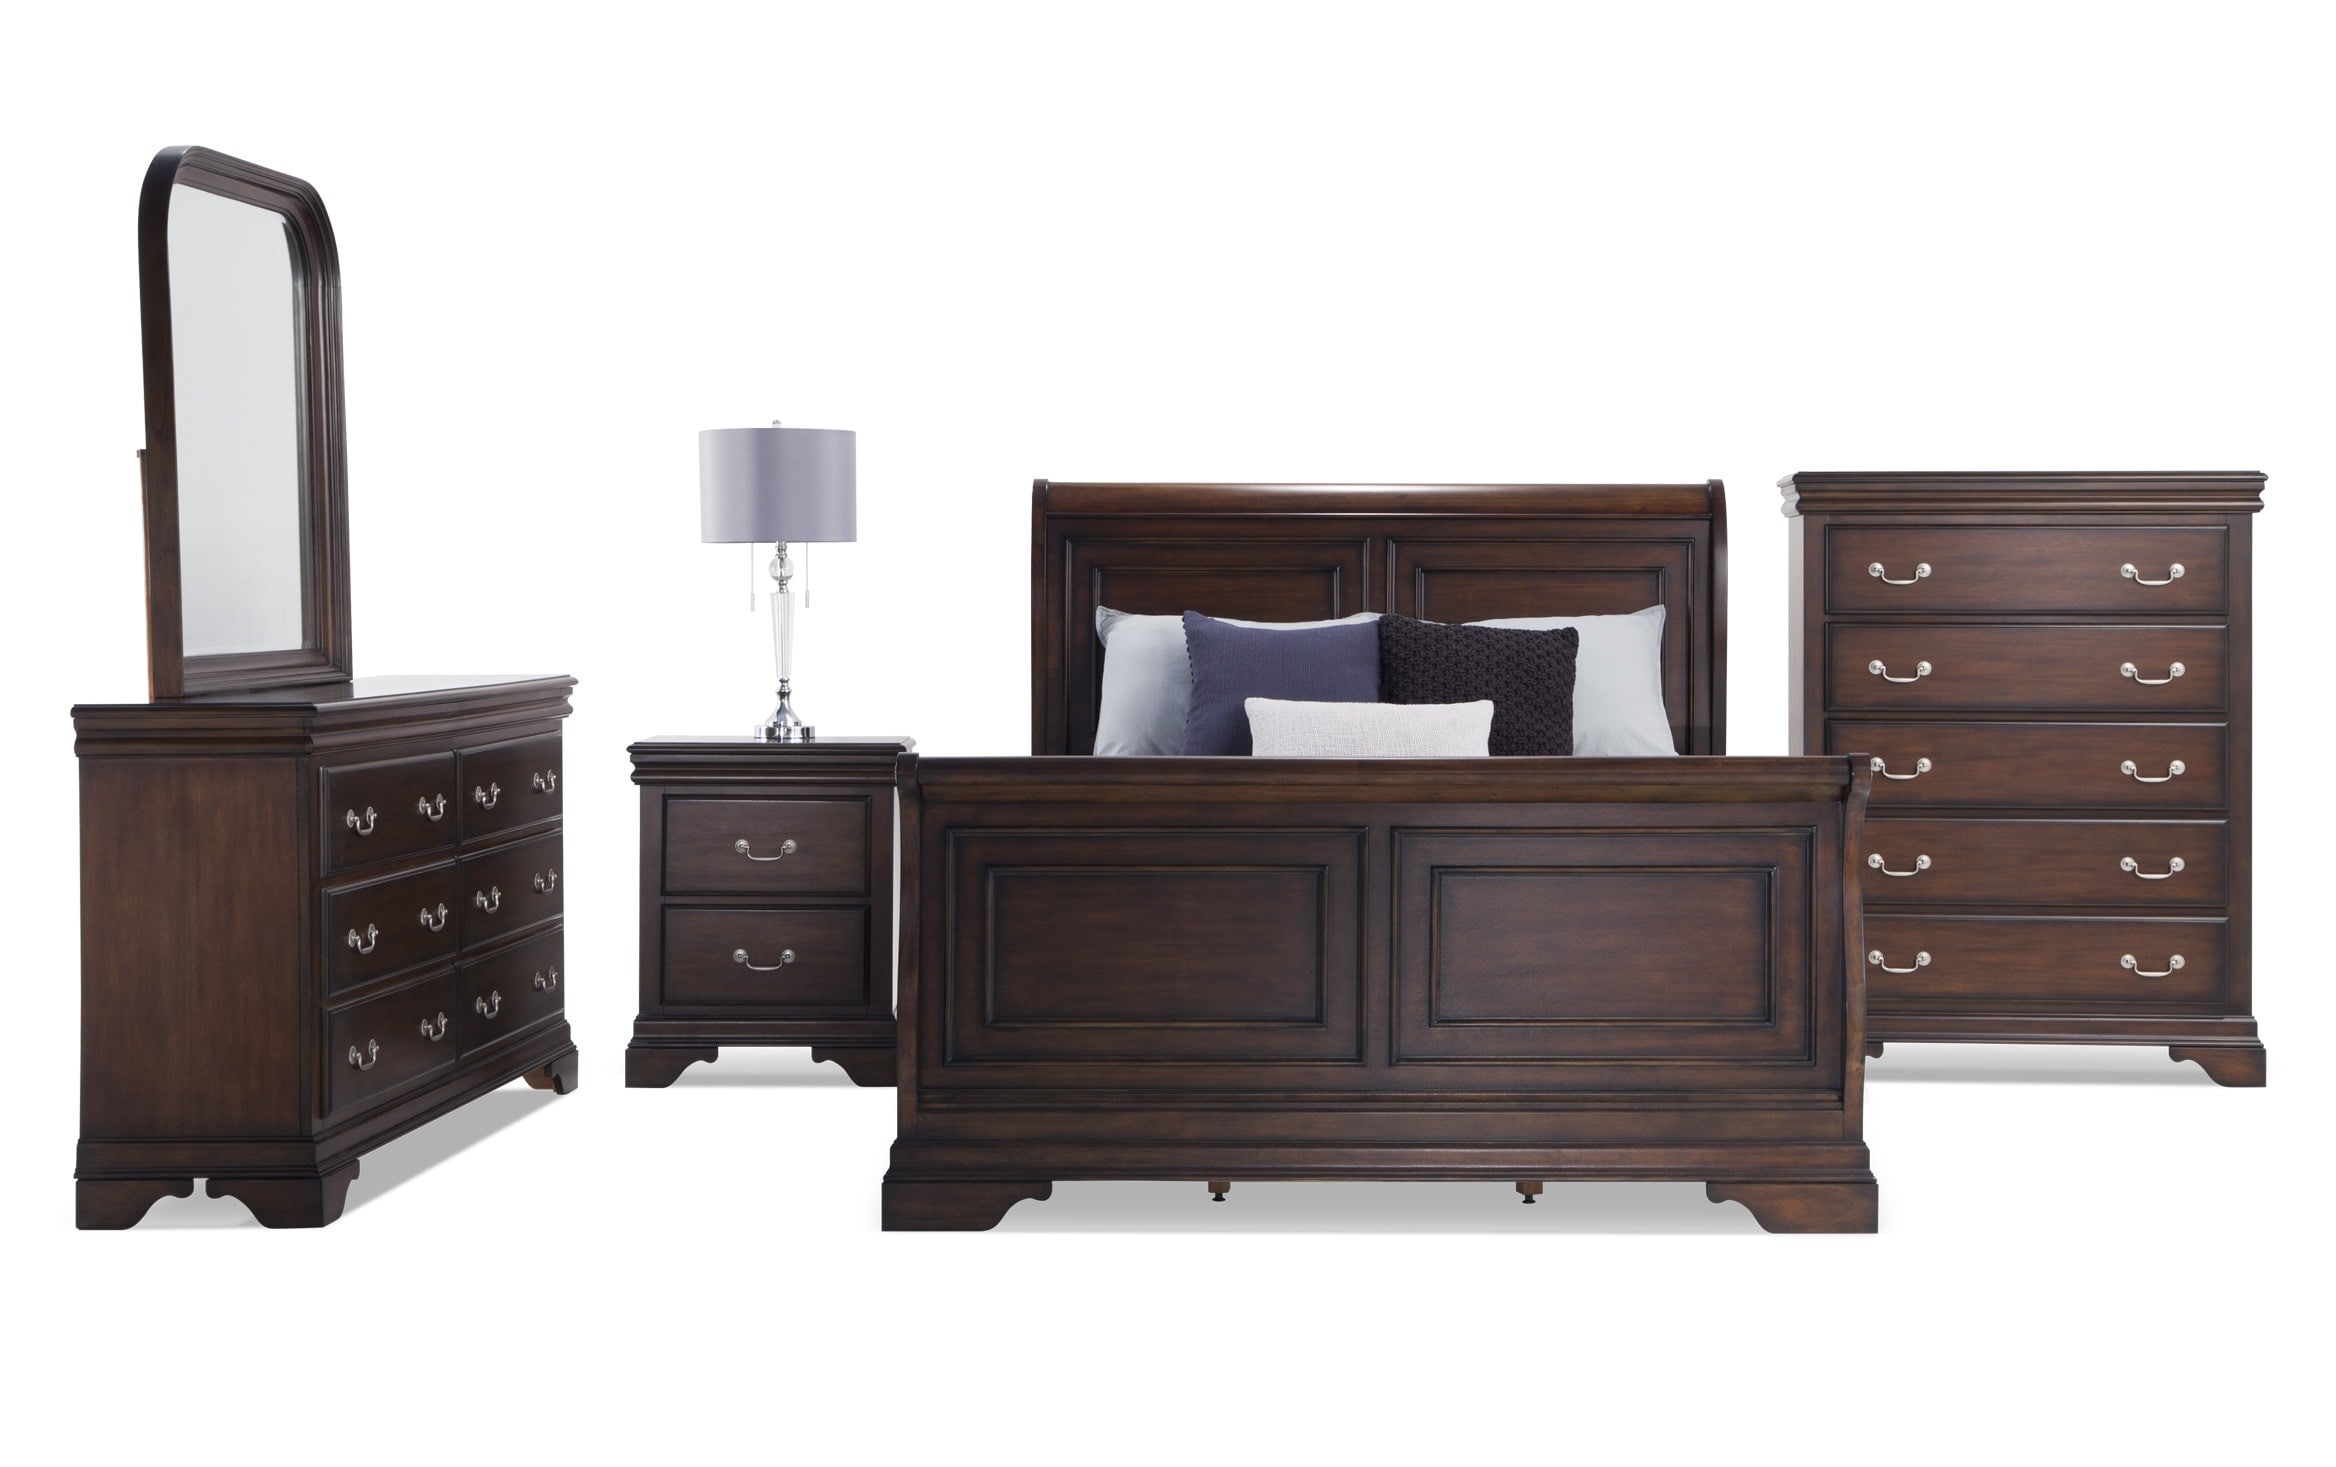 Louie Twin Cherry Bedroom Set, King Size Bed Sets Bobs Furniture